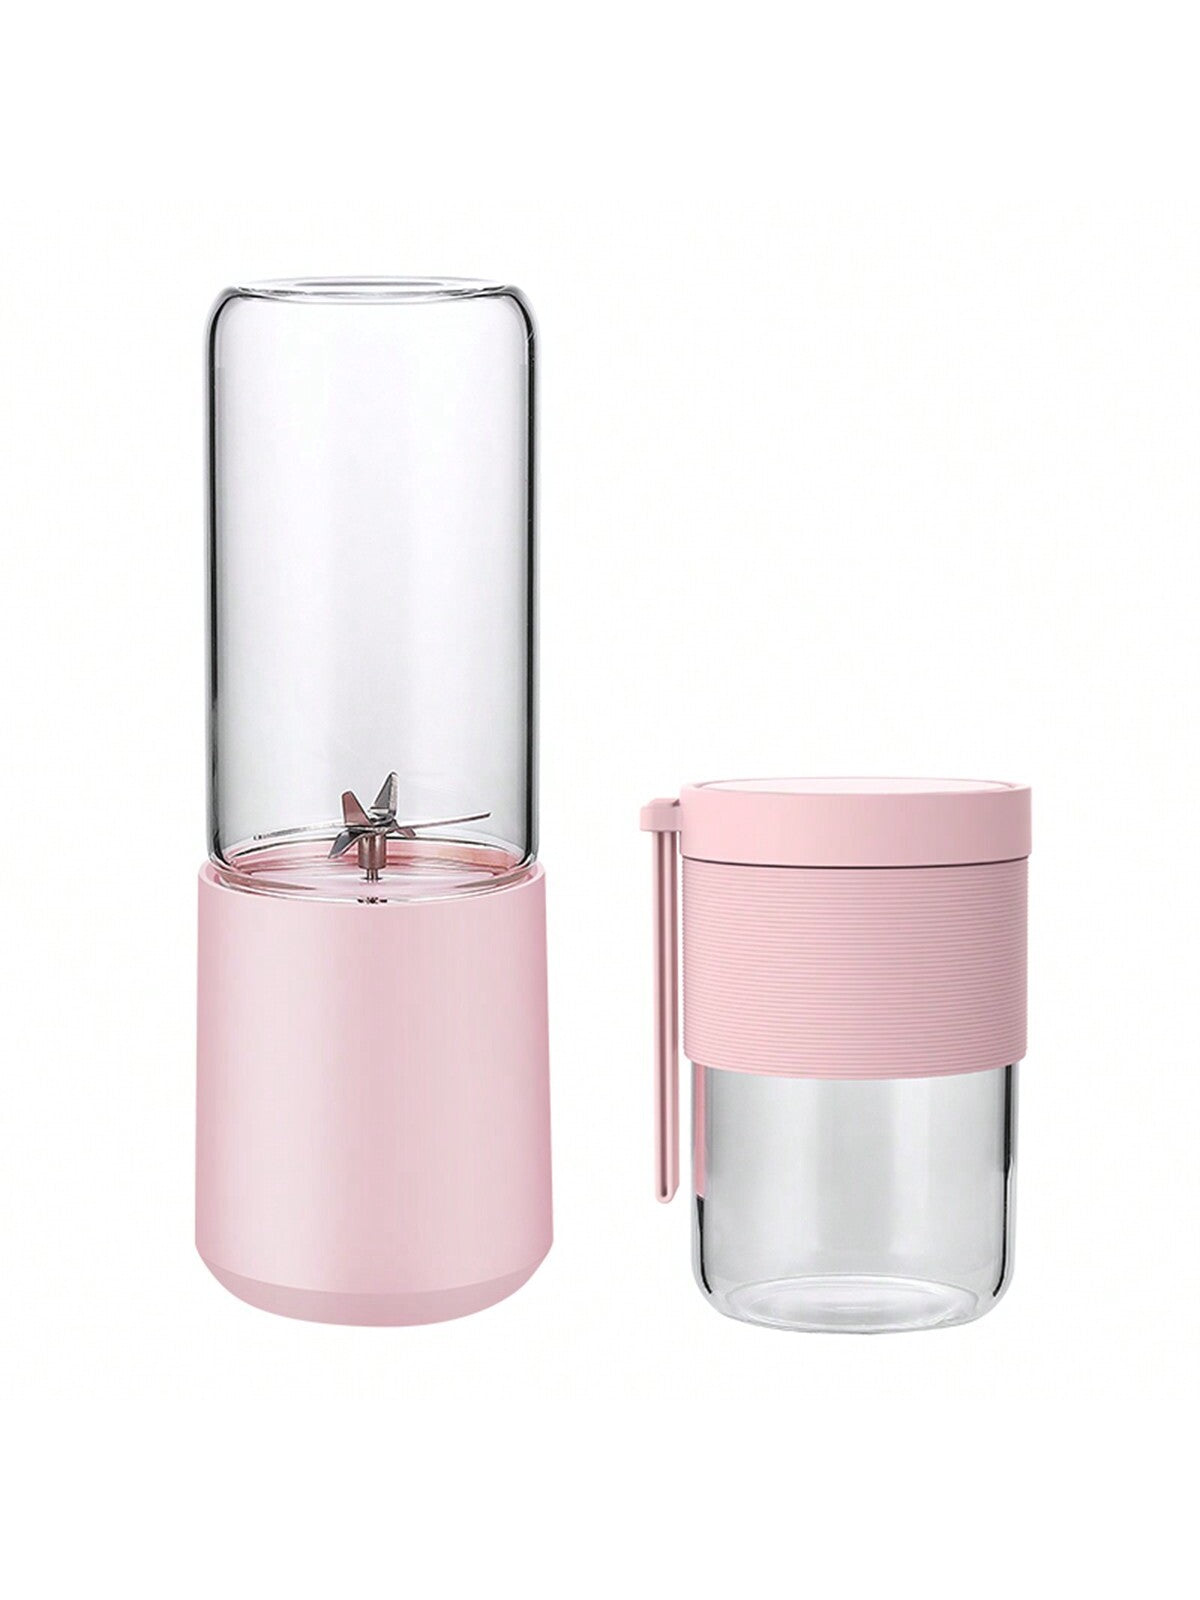 Double Cup Juice Extractor And Juice Cup Mini Portable Household Electric Fruit Juicer Multifunctional Blender Wireless Mini Juicer Cup-Pink-1